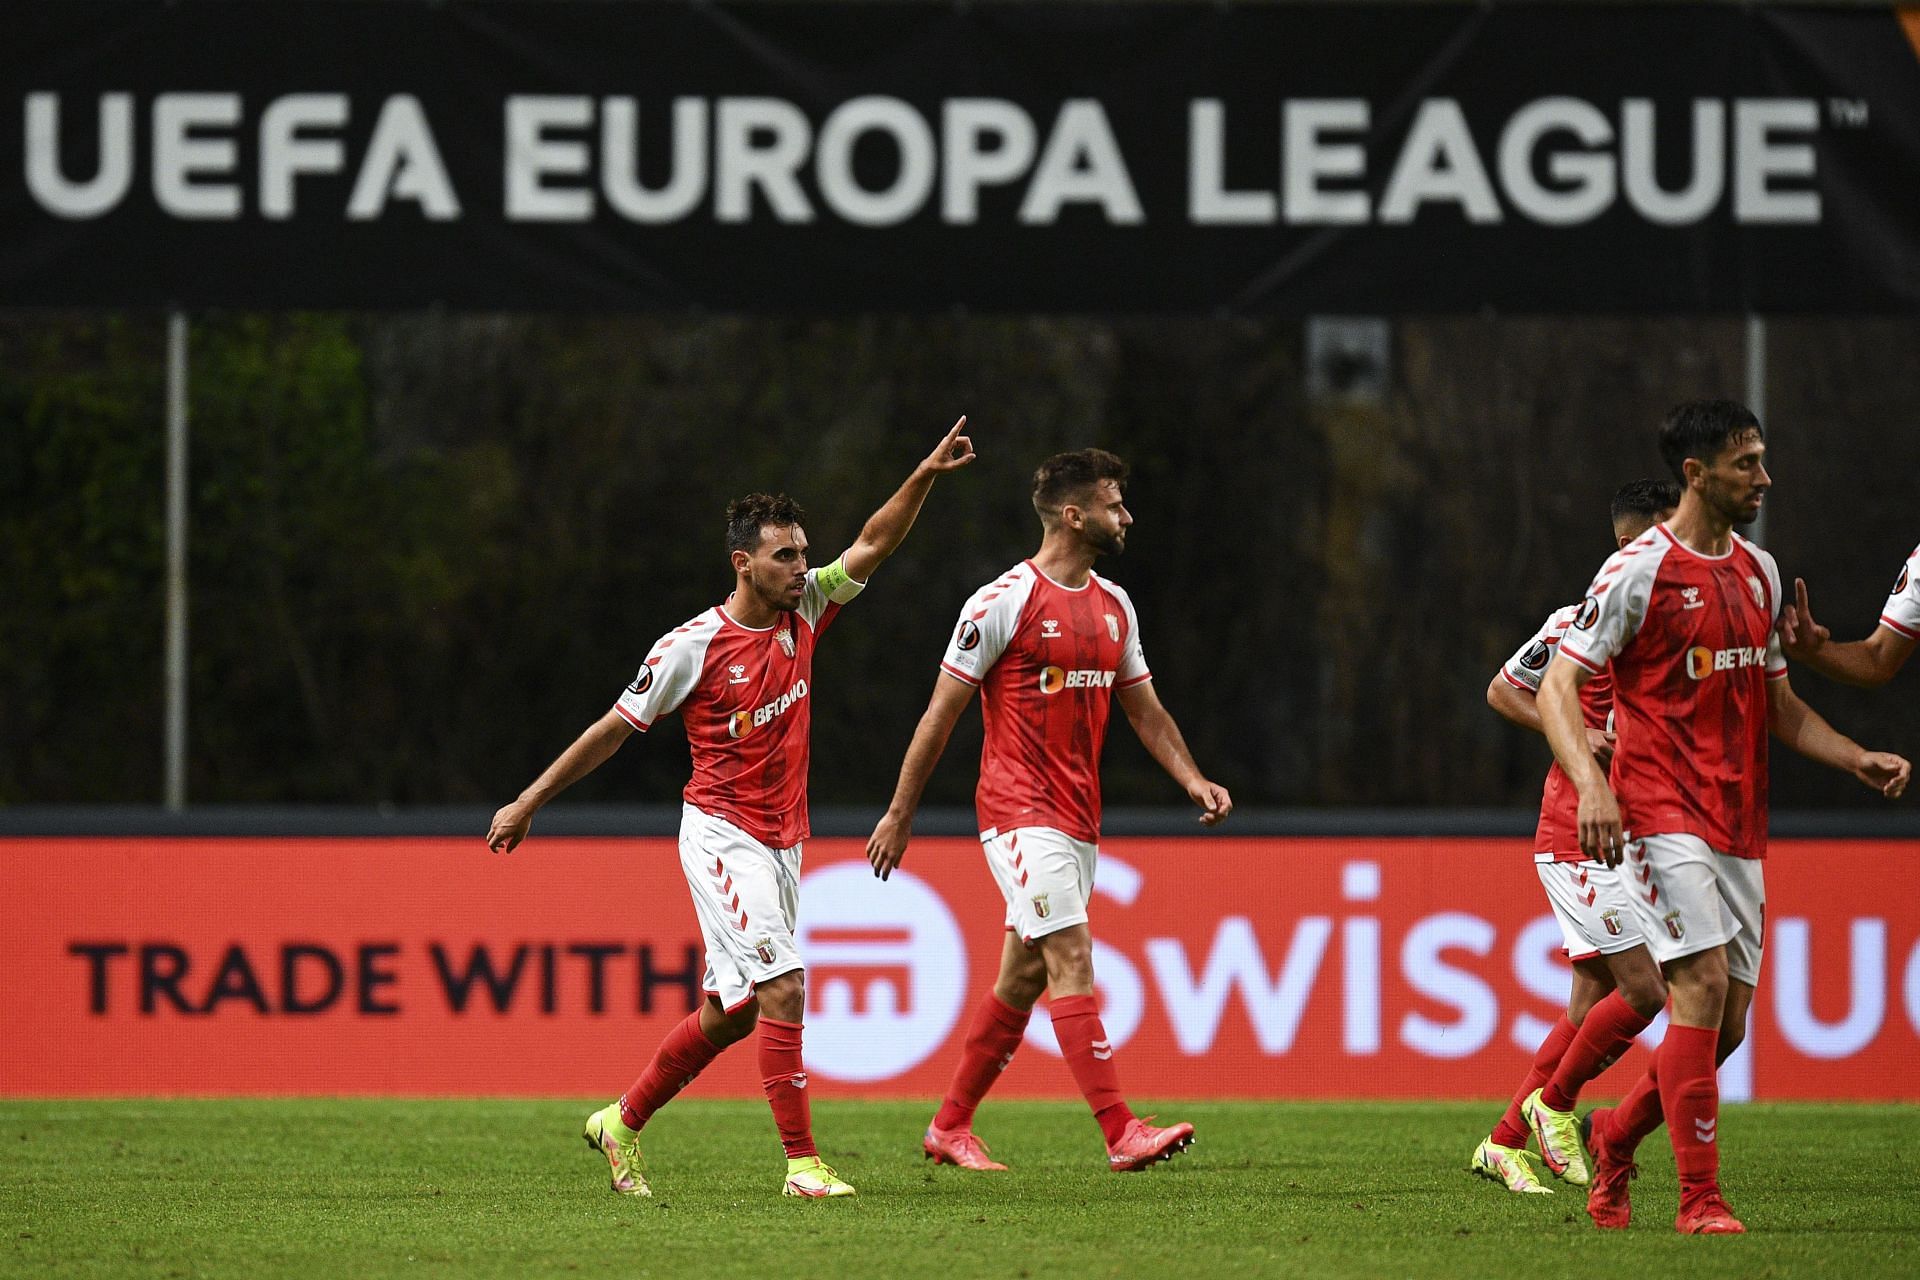 Sporting Braga will look to get an important three points in the league against Famalicao